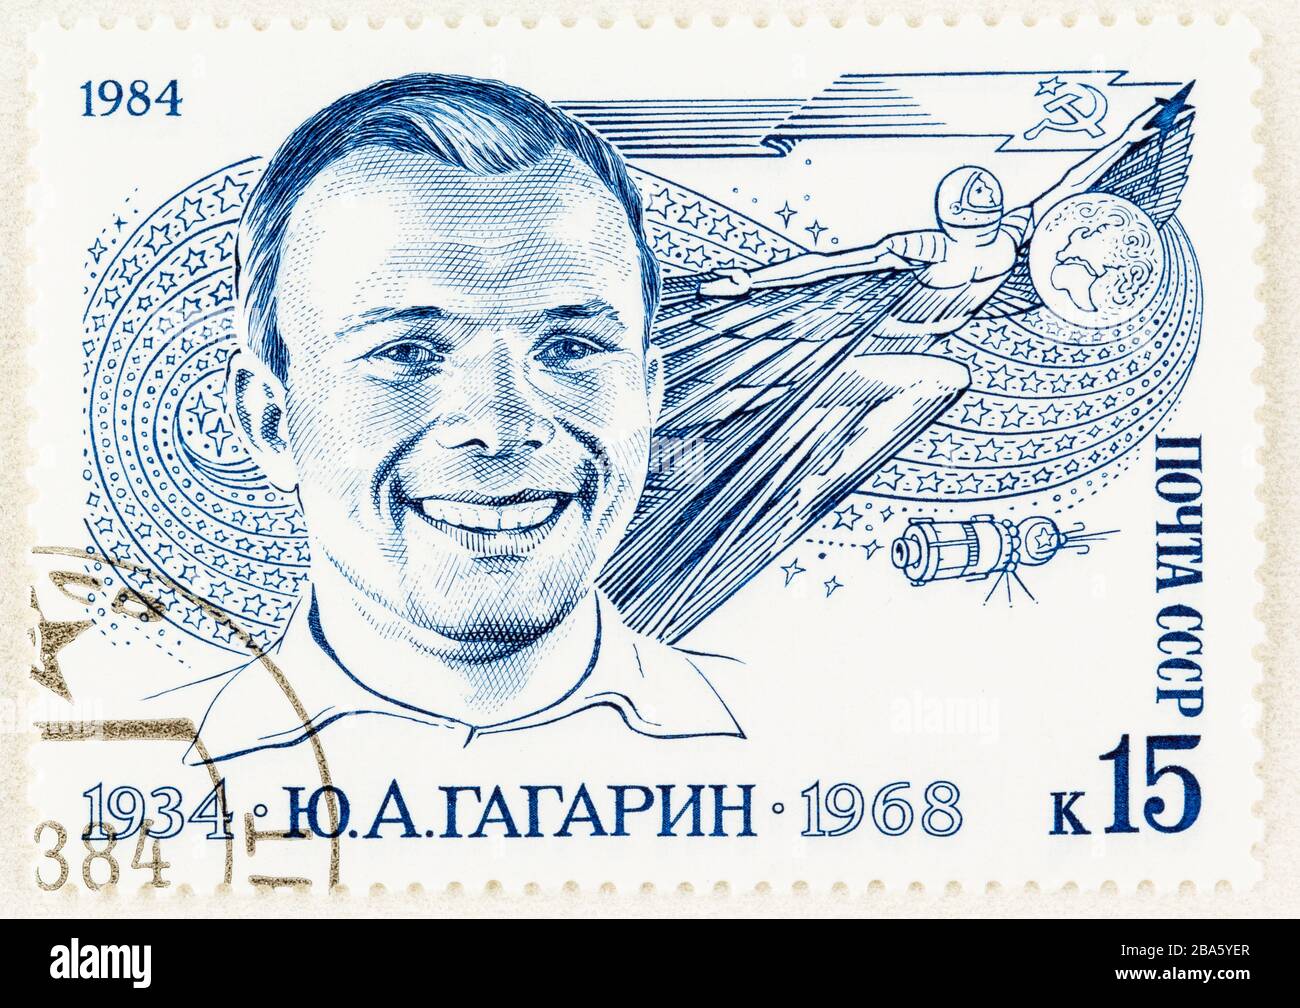 SEATTLE WASHINGTON - March 25, 2020: Close up of used Soviet postage stamp featuring Yuri Gagarin, first man in Space. Stock Photo